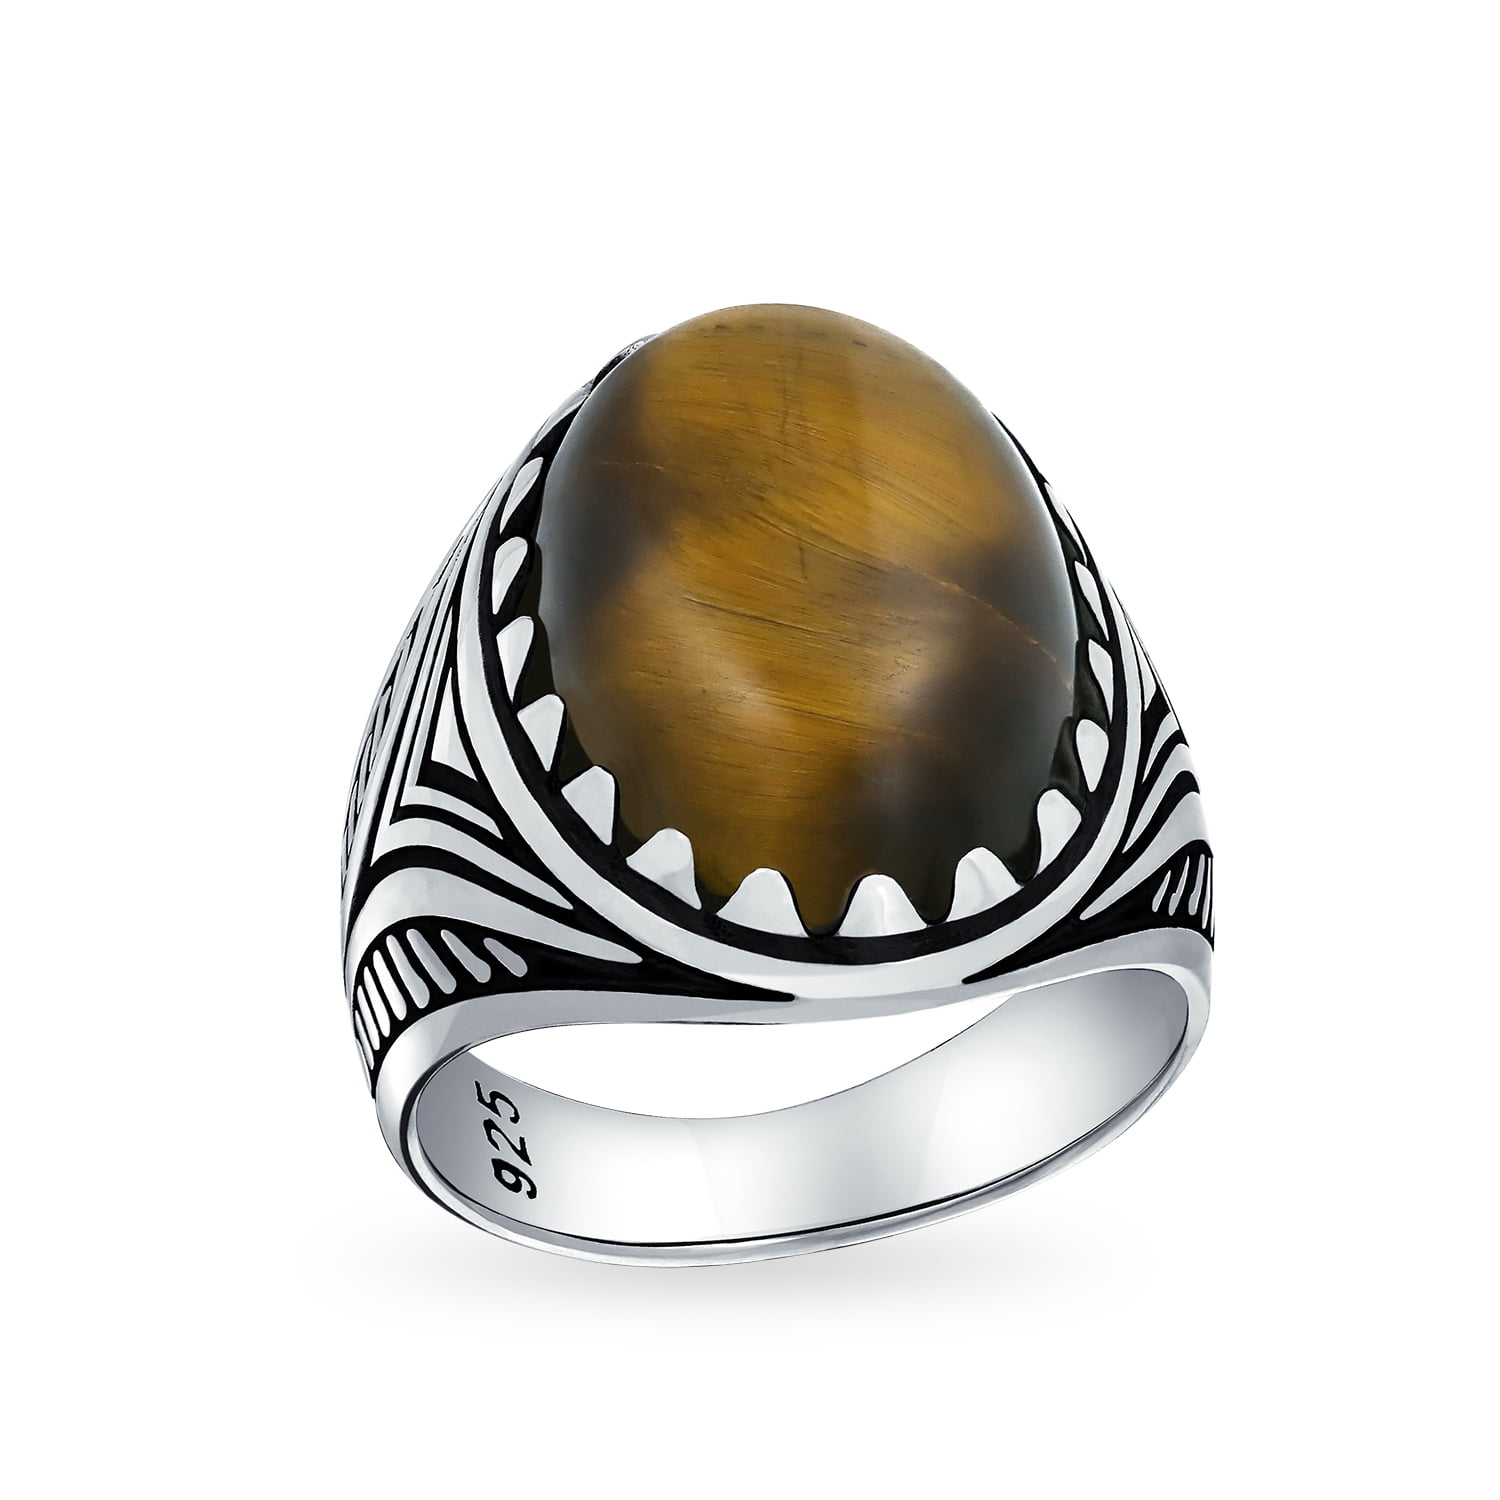 Luxury Tigers Eye and Sapphire Stone Handmade 925 Sterling Silver Mens Ring 